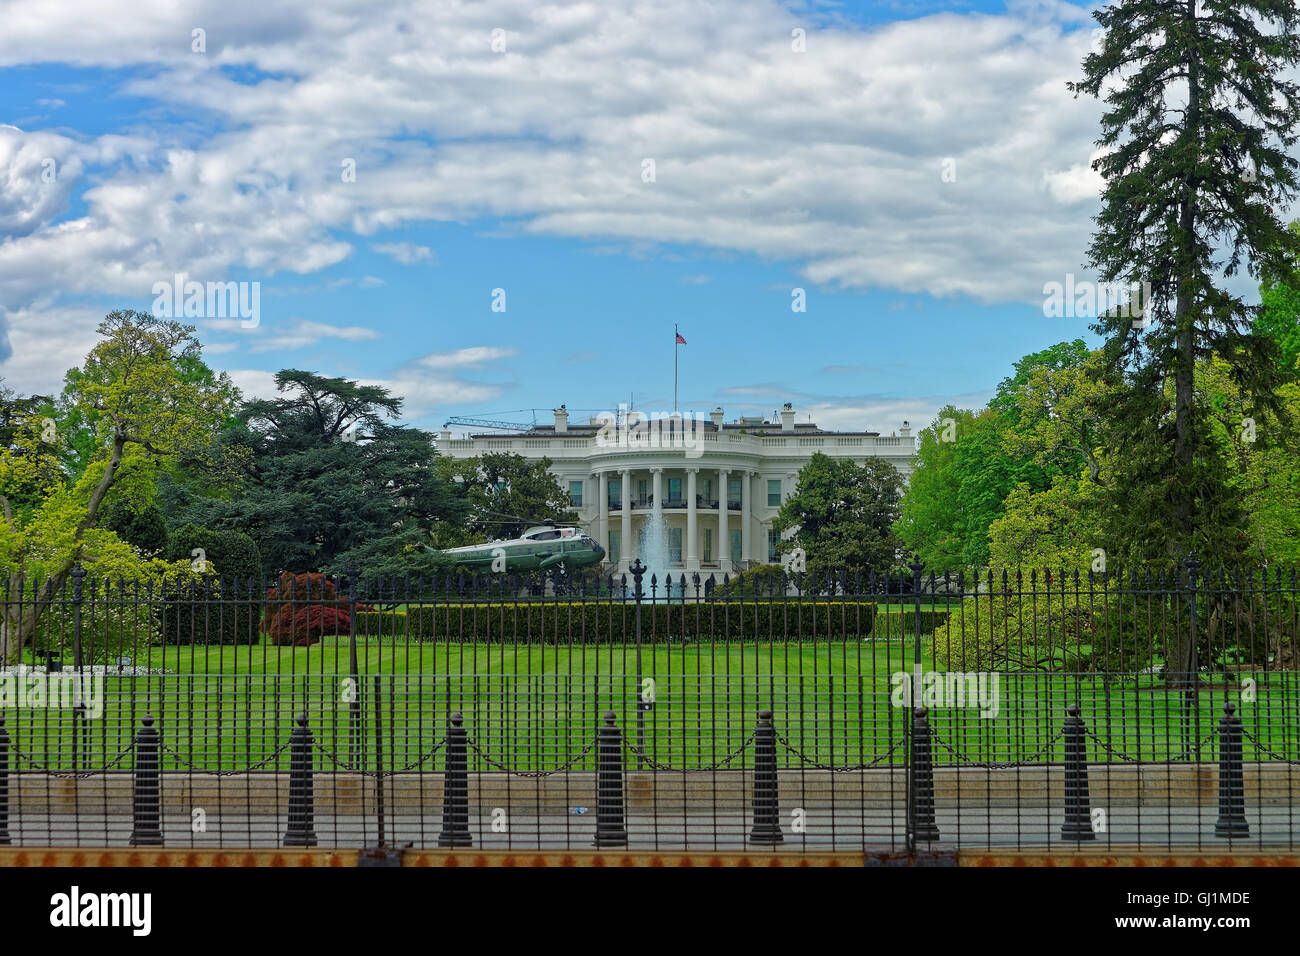 Helicopter near the White House in Washington D.C., USA. The residence of the US President. President John Adams was the first one to live there in 1800. The architect of the building was James Hoban. Stock Photo